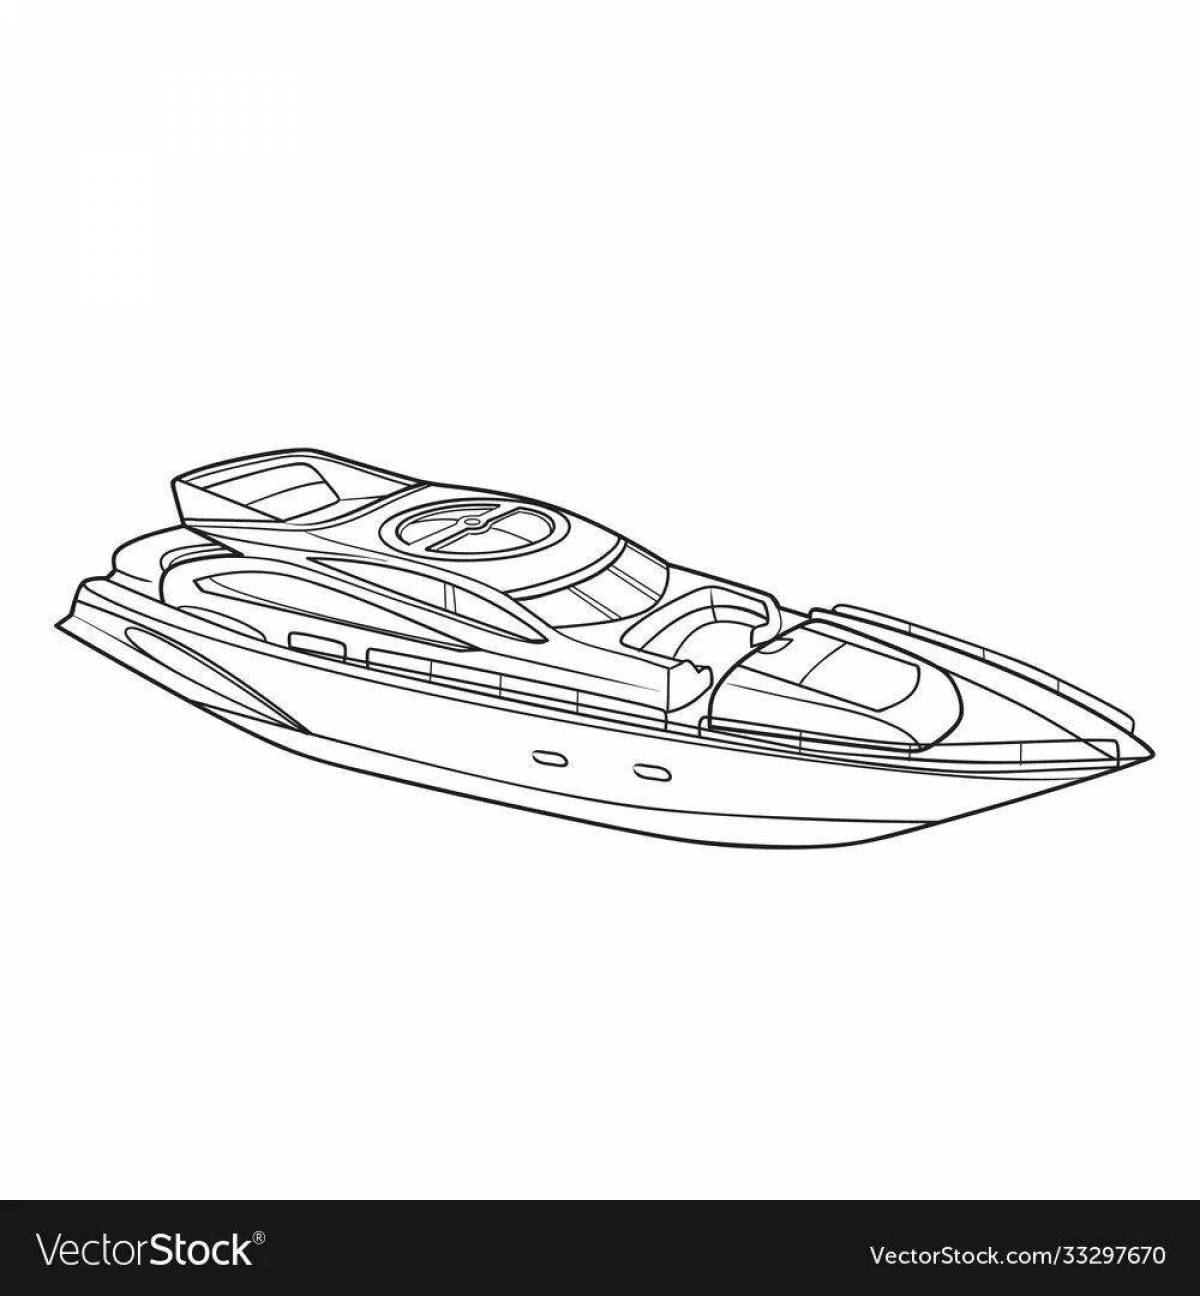 Flawless Jet Ski coloring page